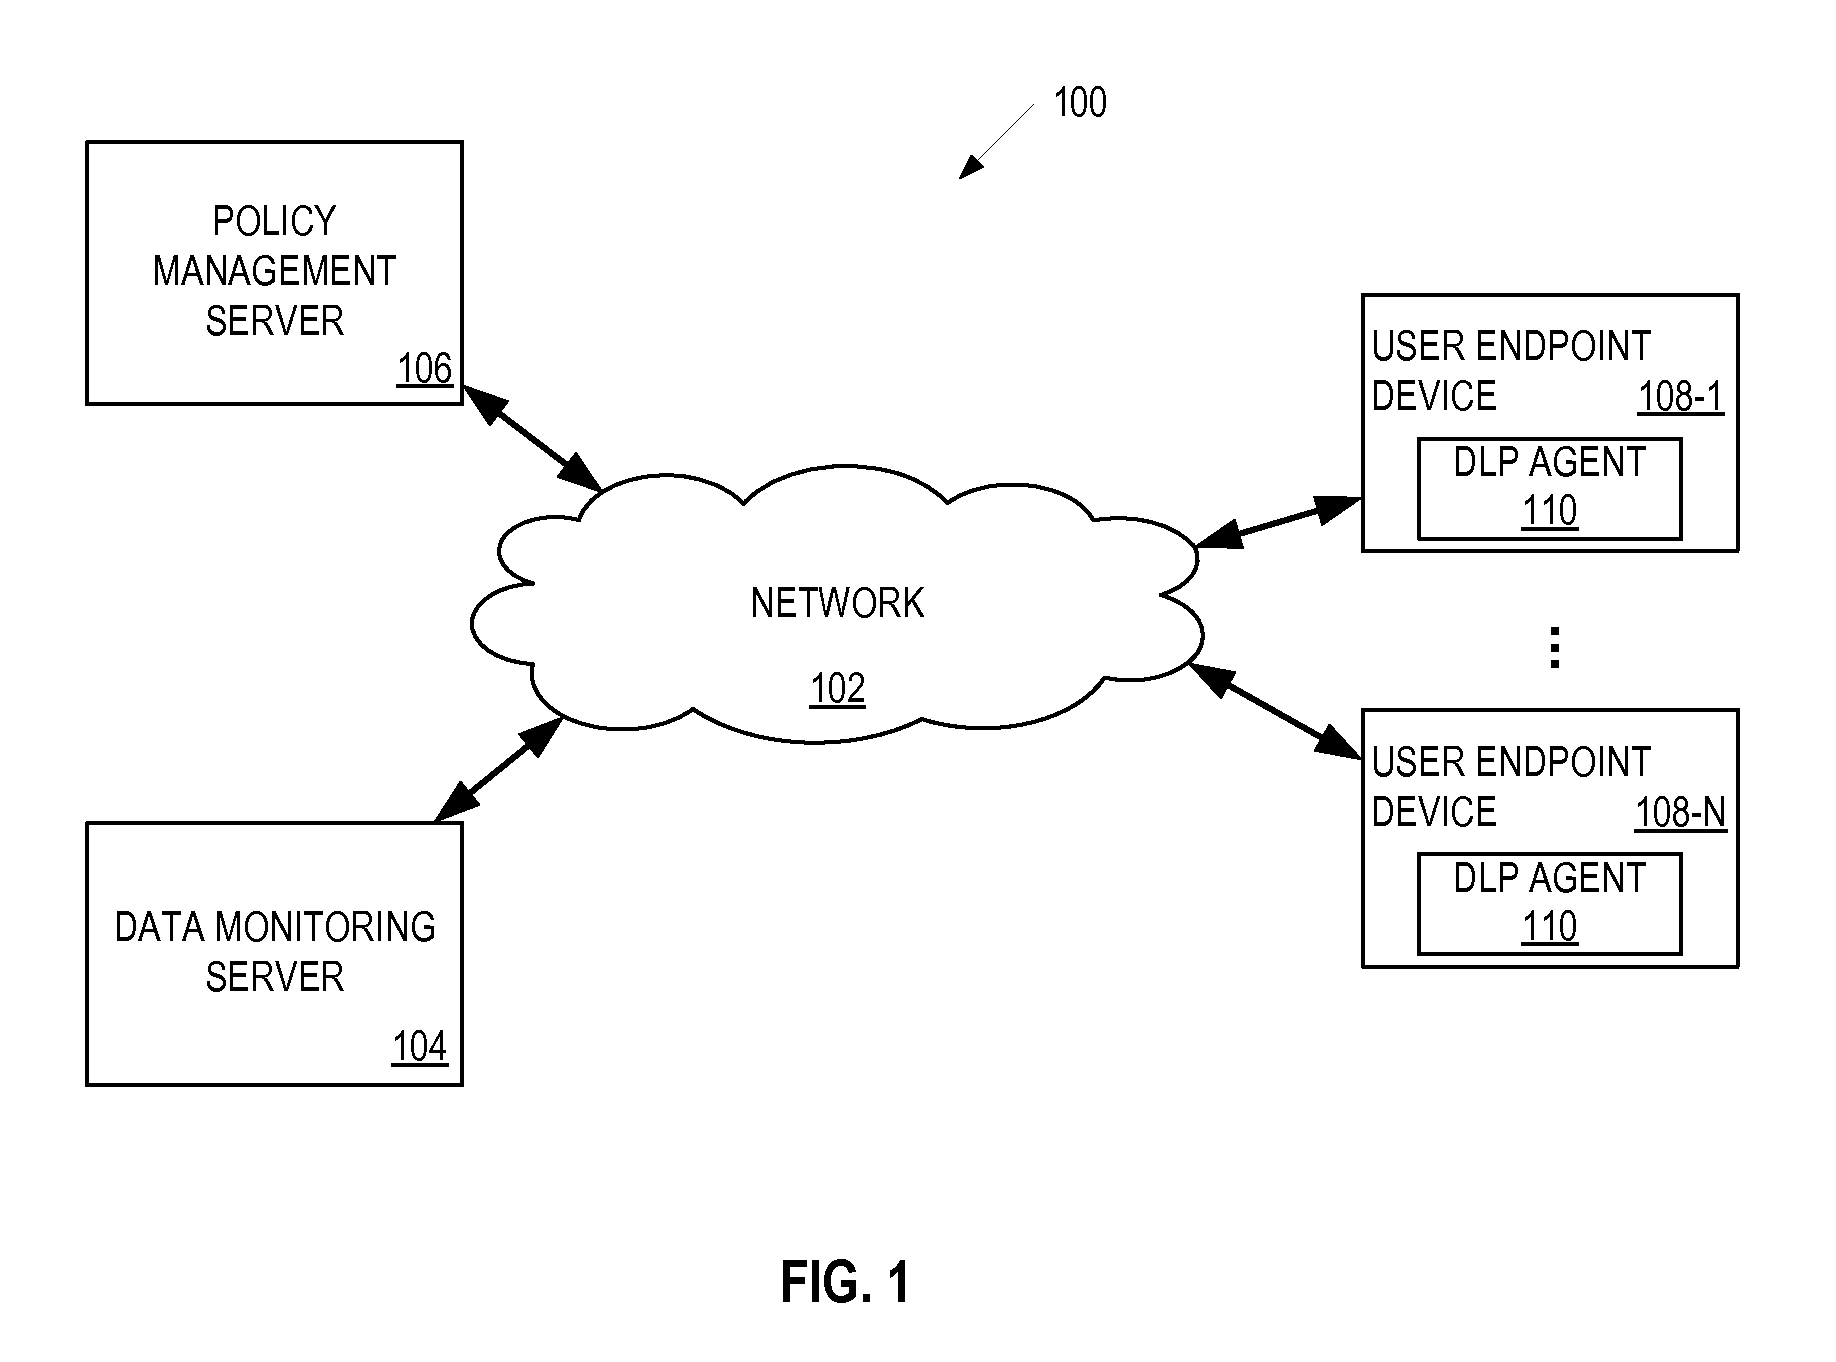 System and method for managing data loss due to policy violations in temporary files